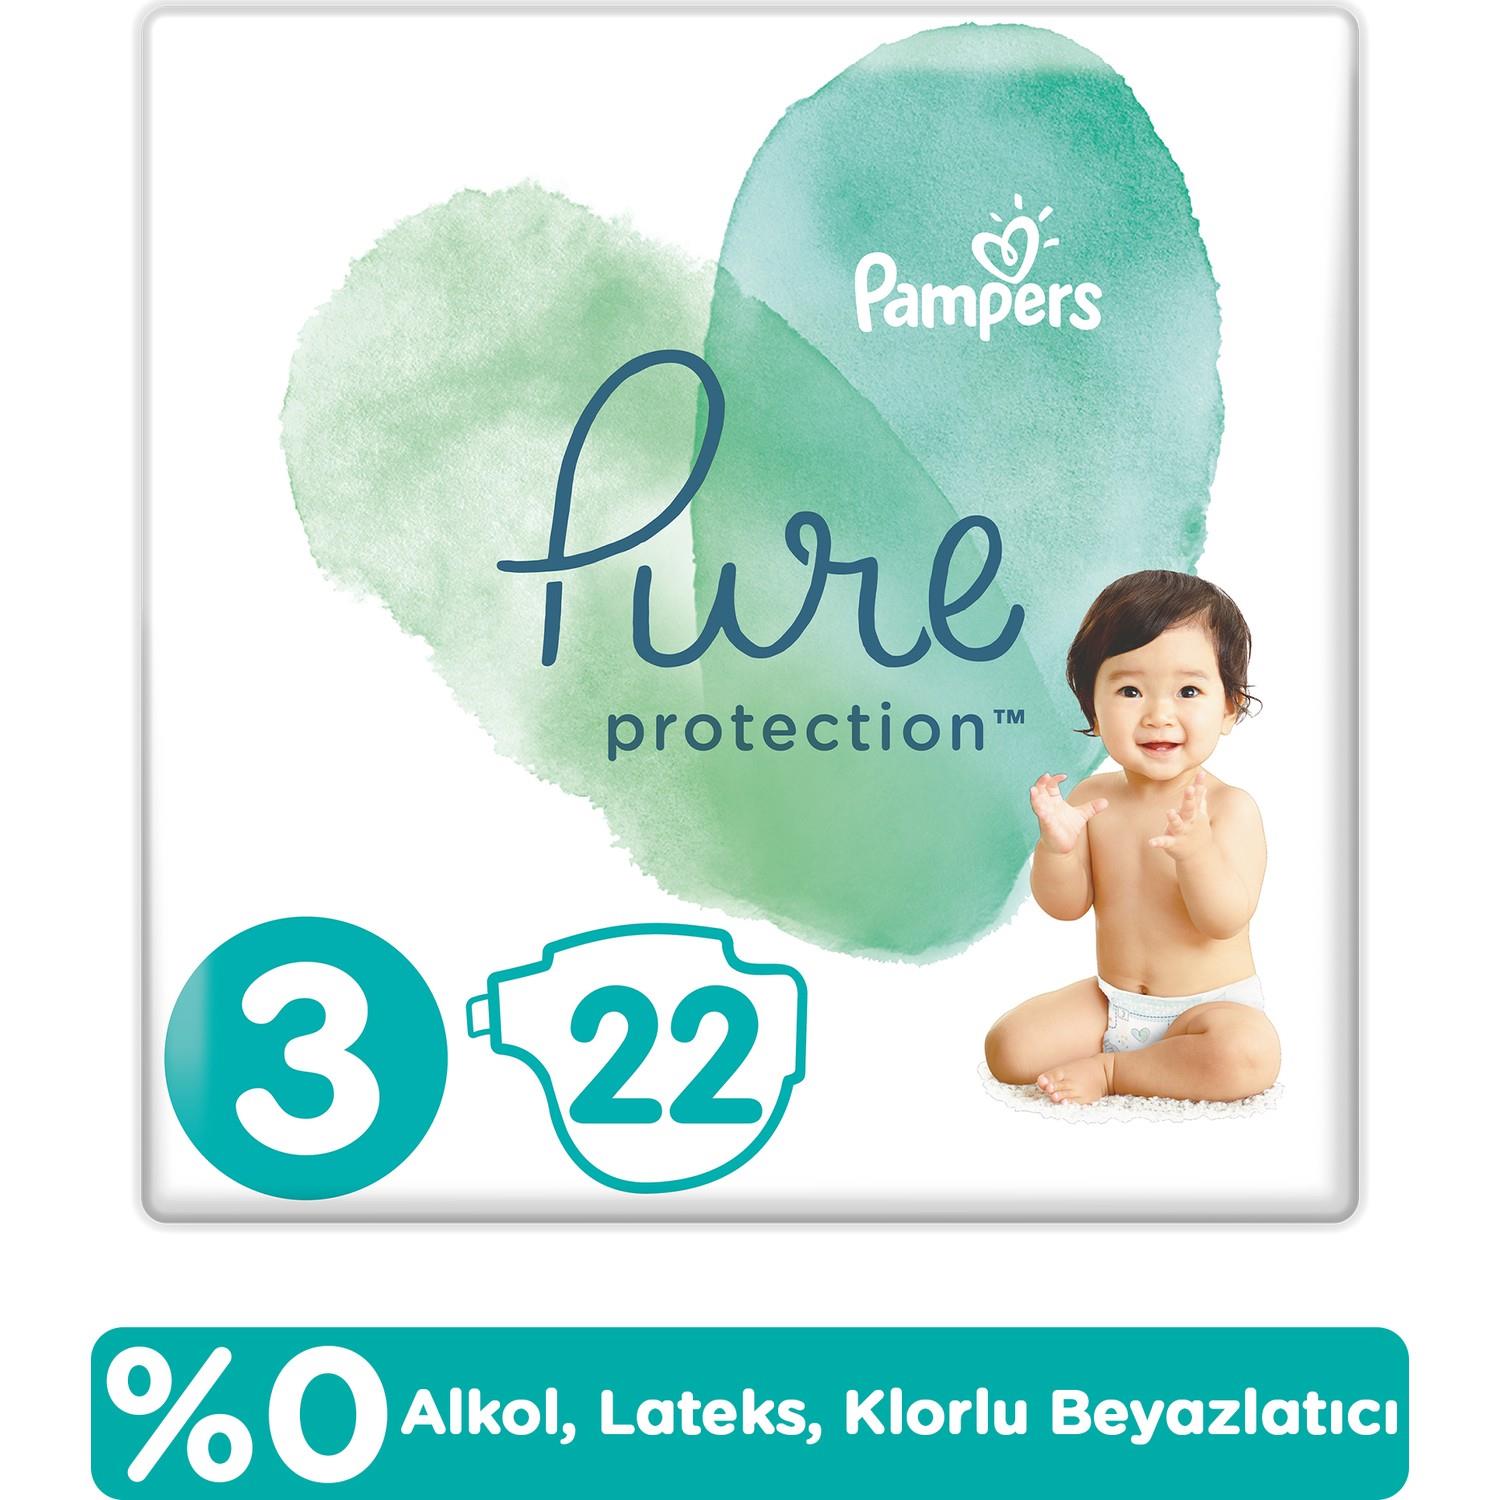 monthly pack pampers